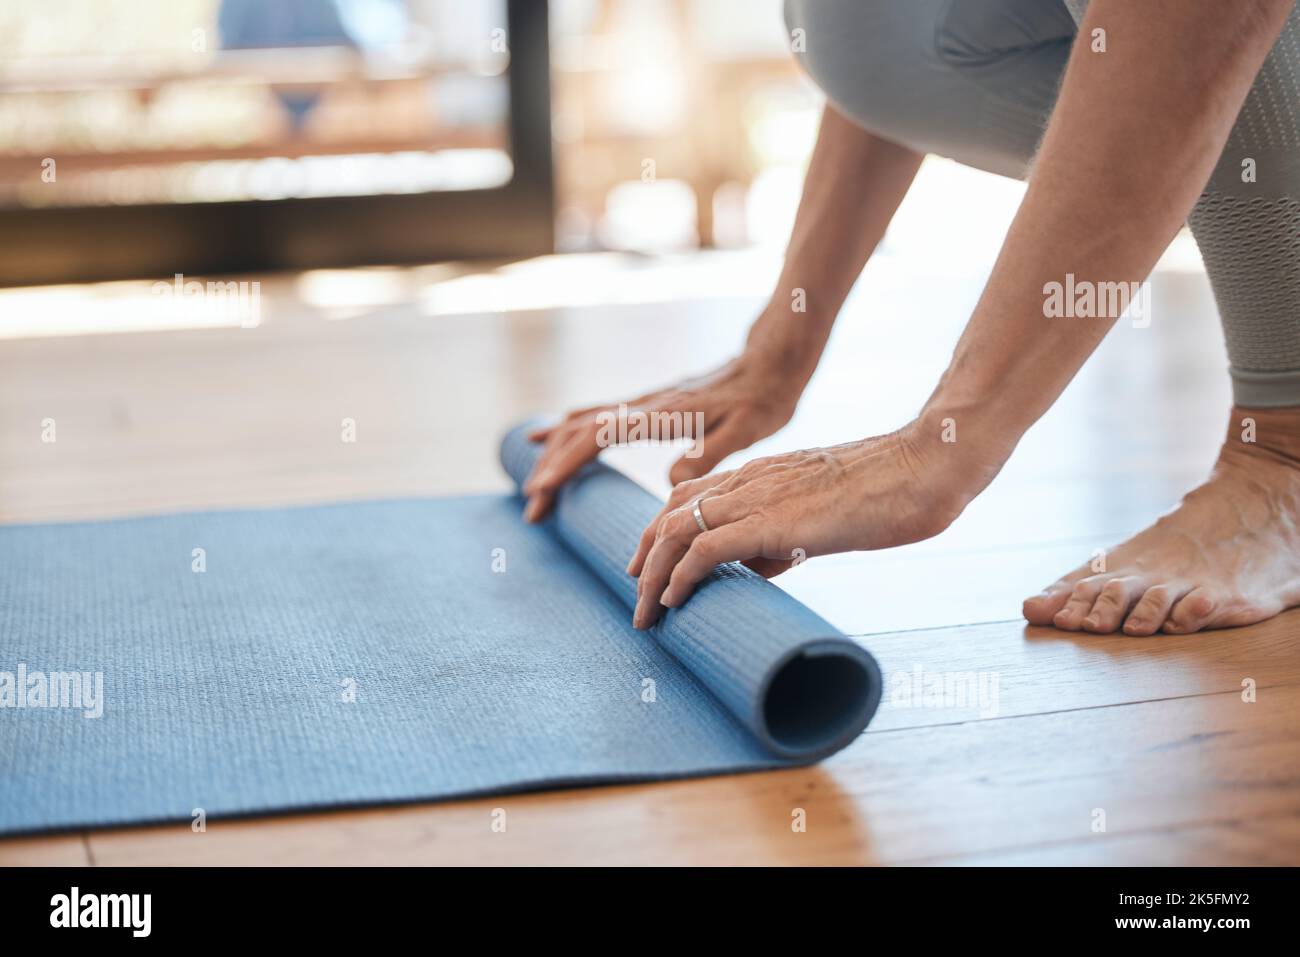 Young slim woman with blonde hair sitting on the yoga mat in split and  training her stretching - using auxiliary stand under the feet Stock Photo  - Alamy